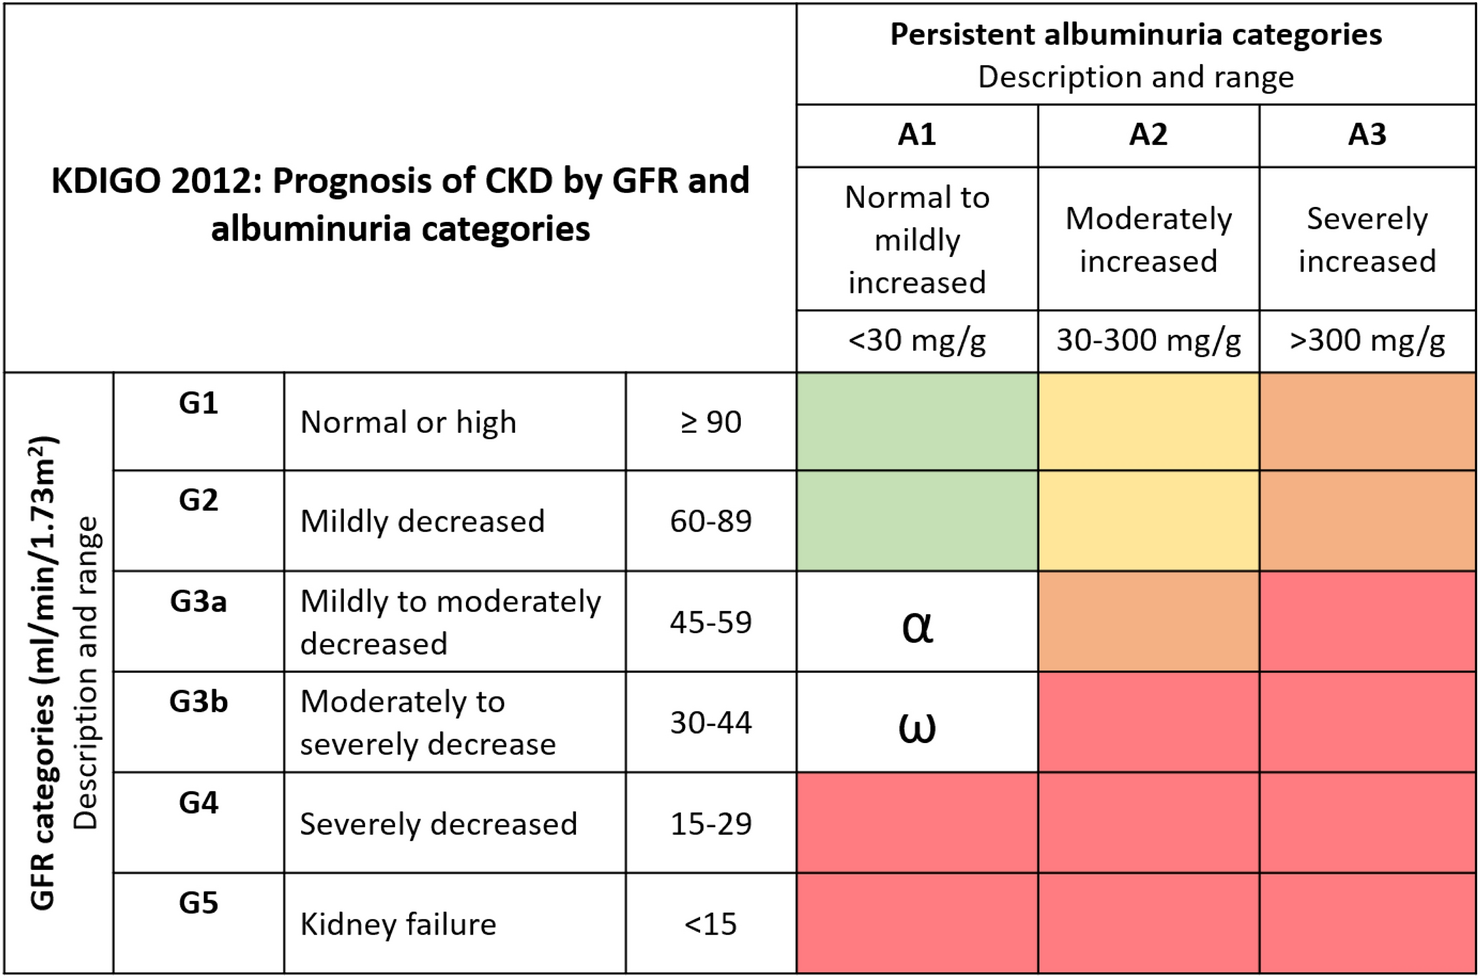 The fourth wave in chronic kidney disease (CKD) classification: taking into account the aging kidney